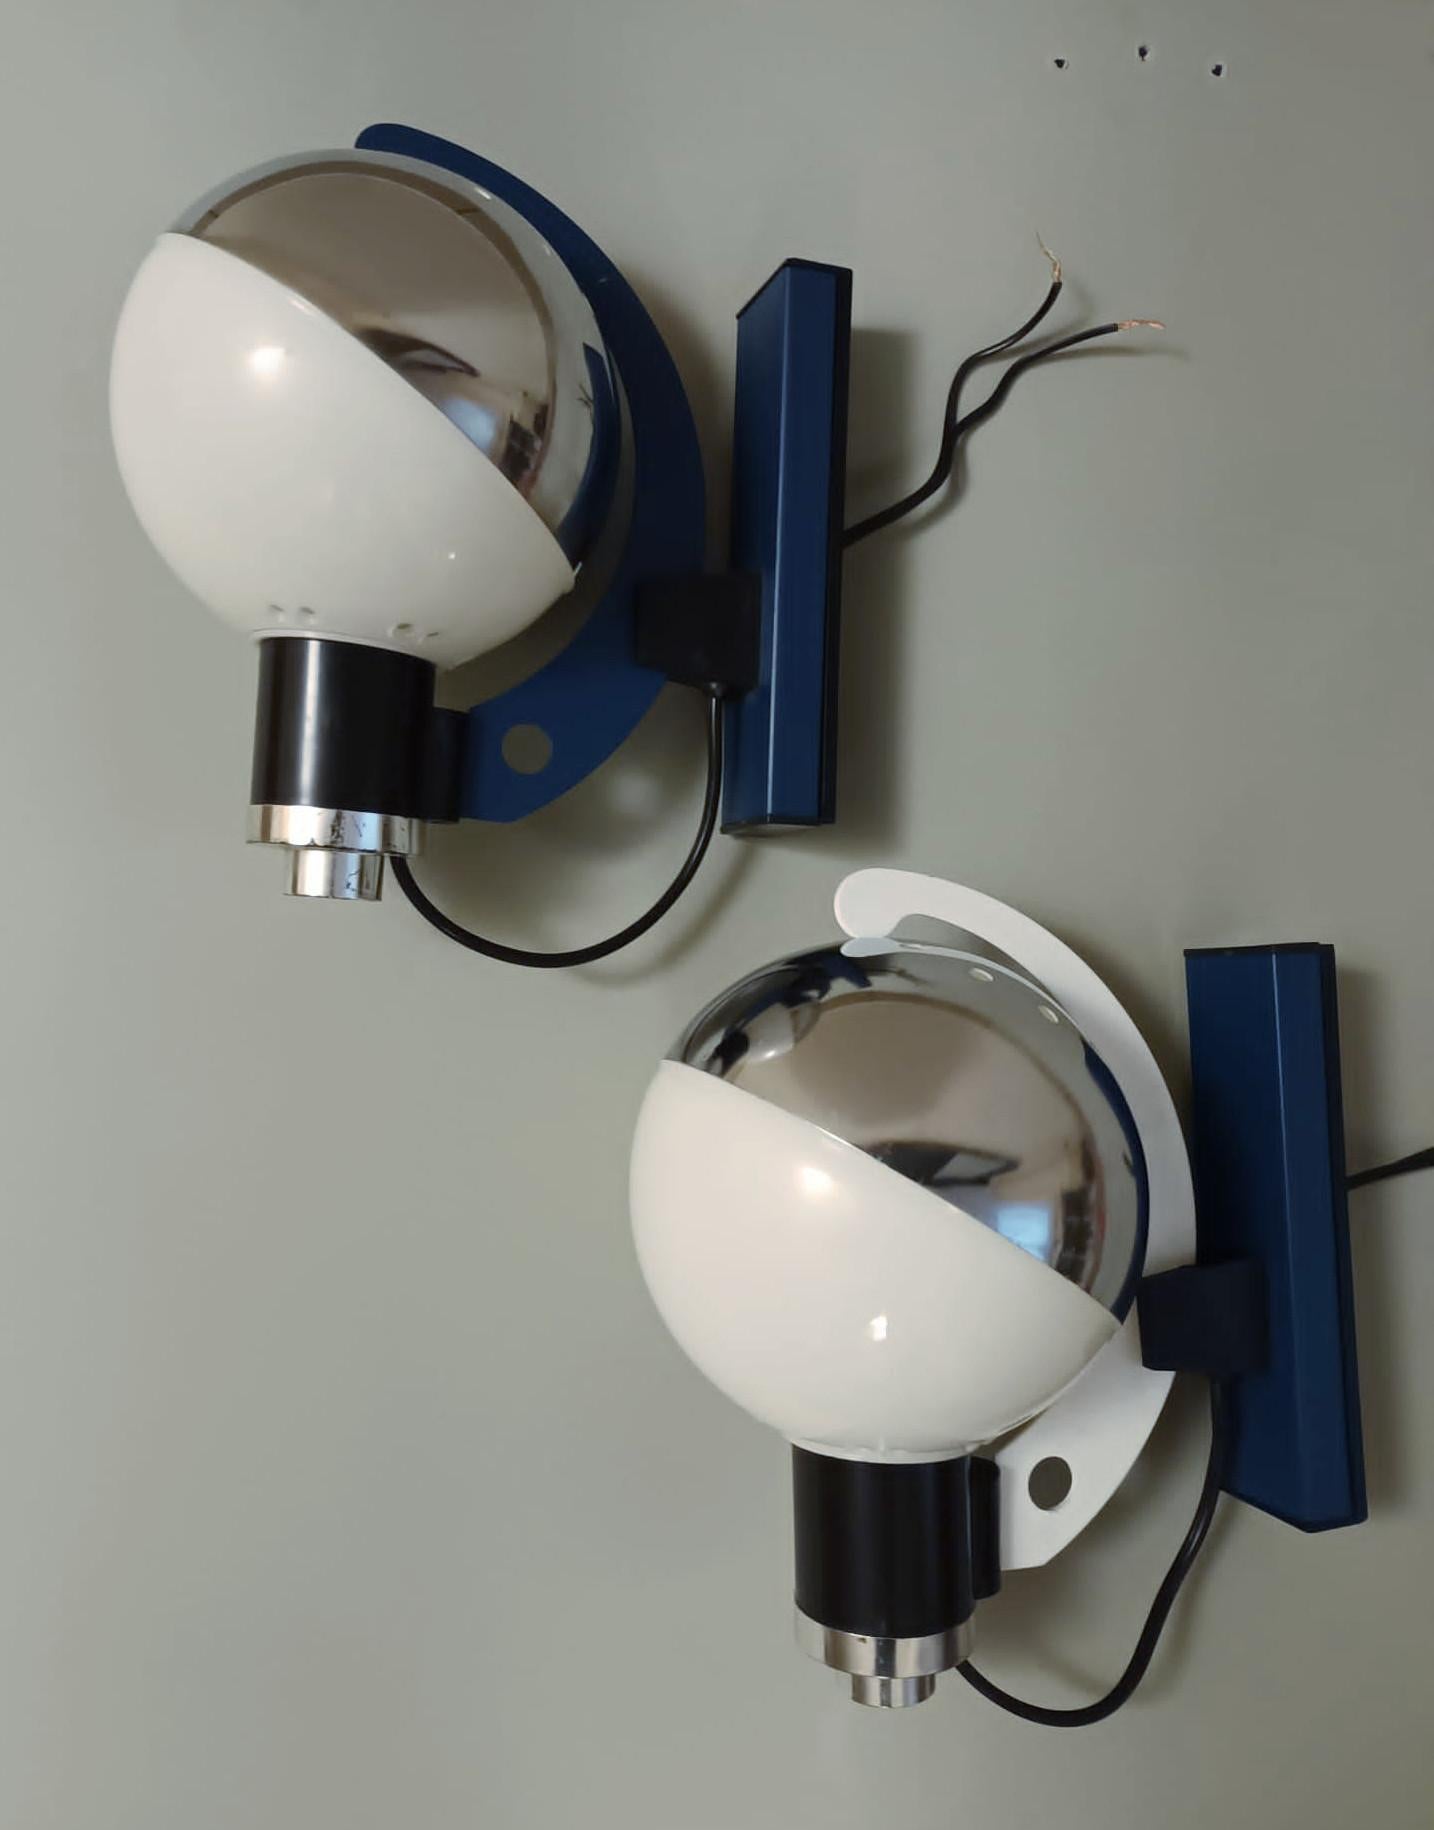 Vintage Italian wall lights with opaline white glass balls mounted on metal frames in blue and white / Made in Italy, circa 1960s
Measures: height 9 inches, width 5.5 inches, depth 8 inches
1 light / E12 or E14 type / max 40W
2 available in stock in